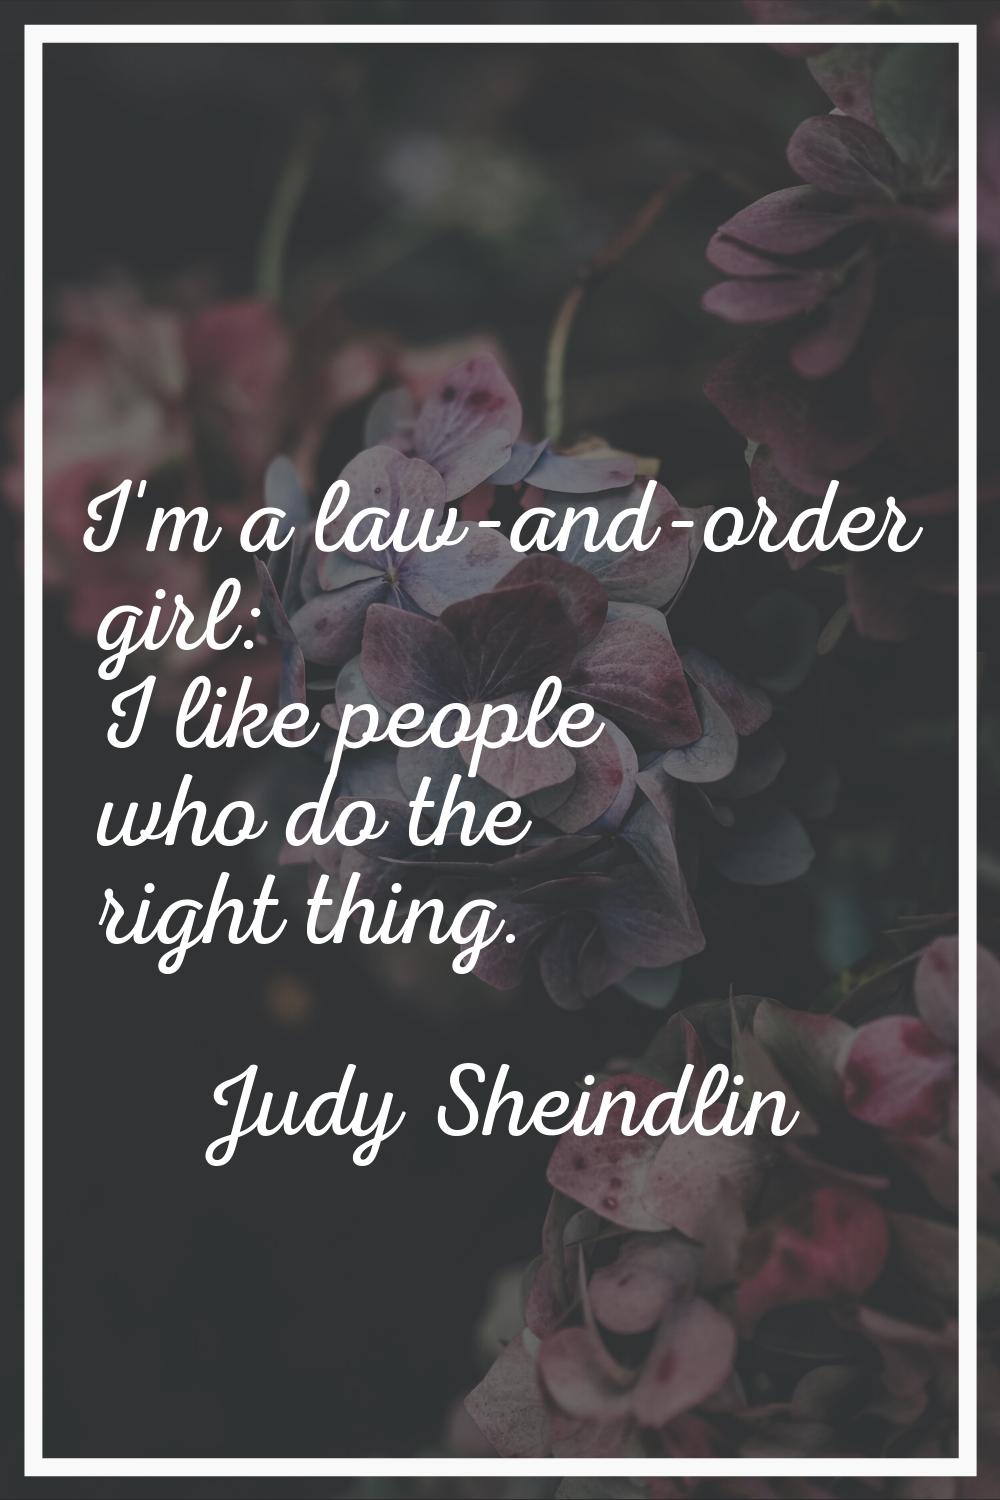 I'm a law-and-order girl: I like people who do the right thing.